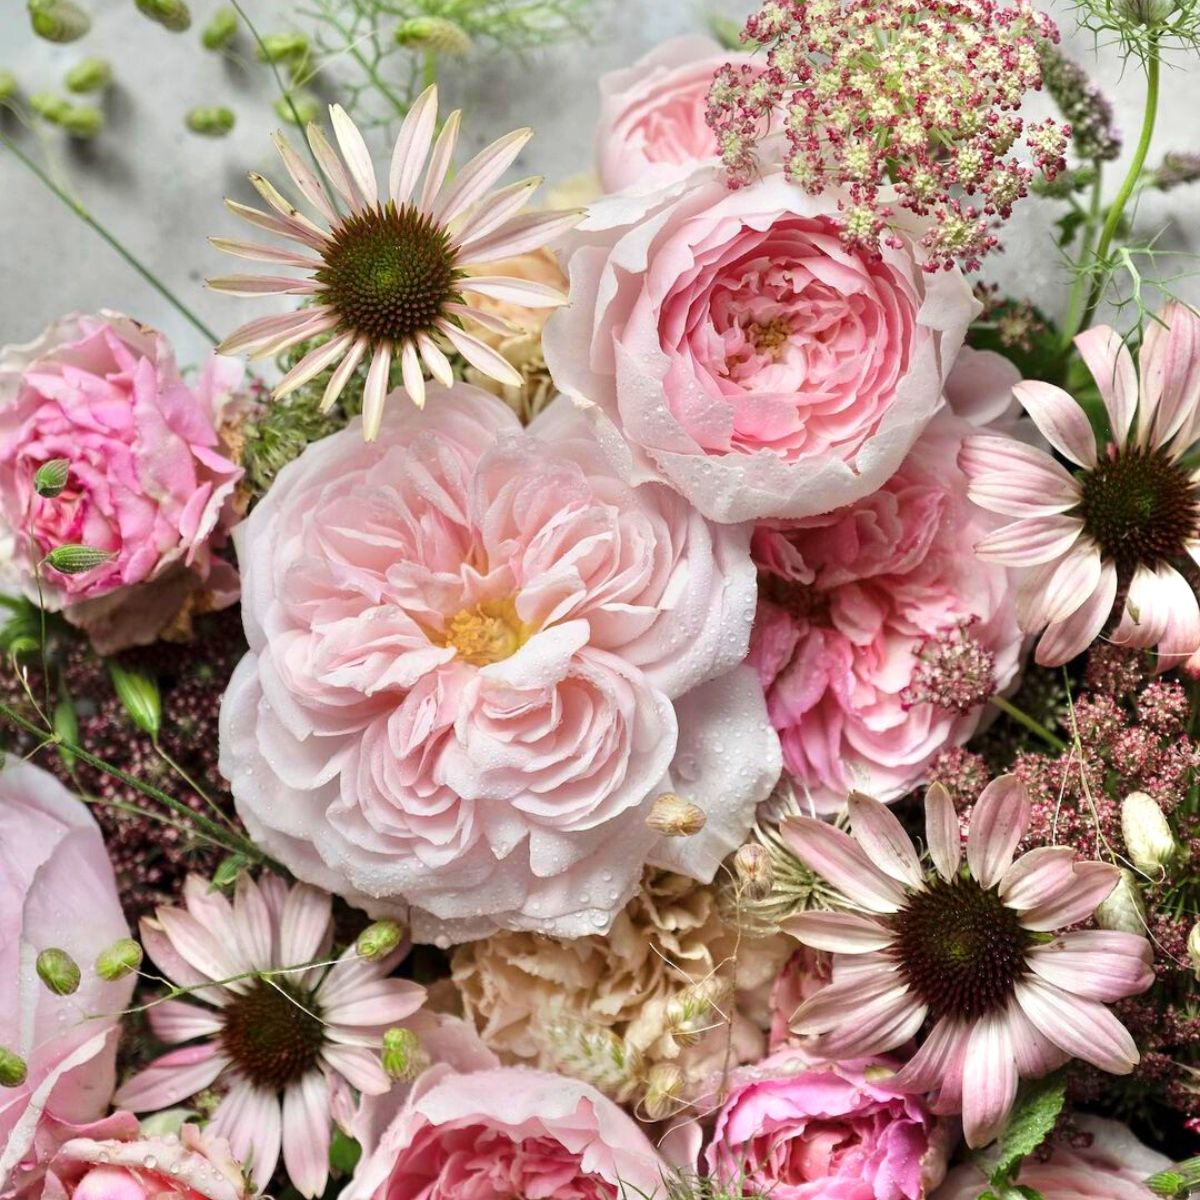 Floral design with colorful pink flowers